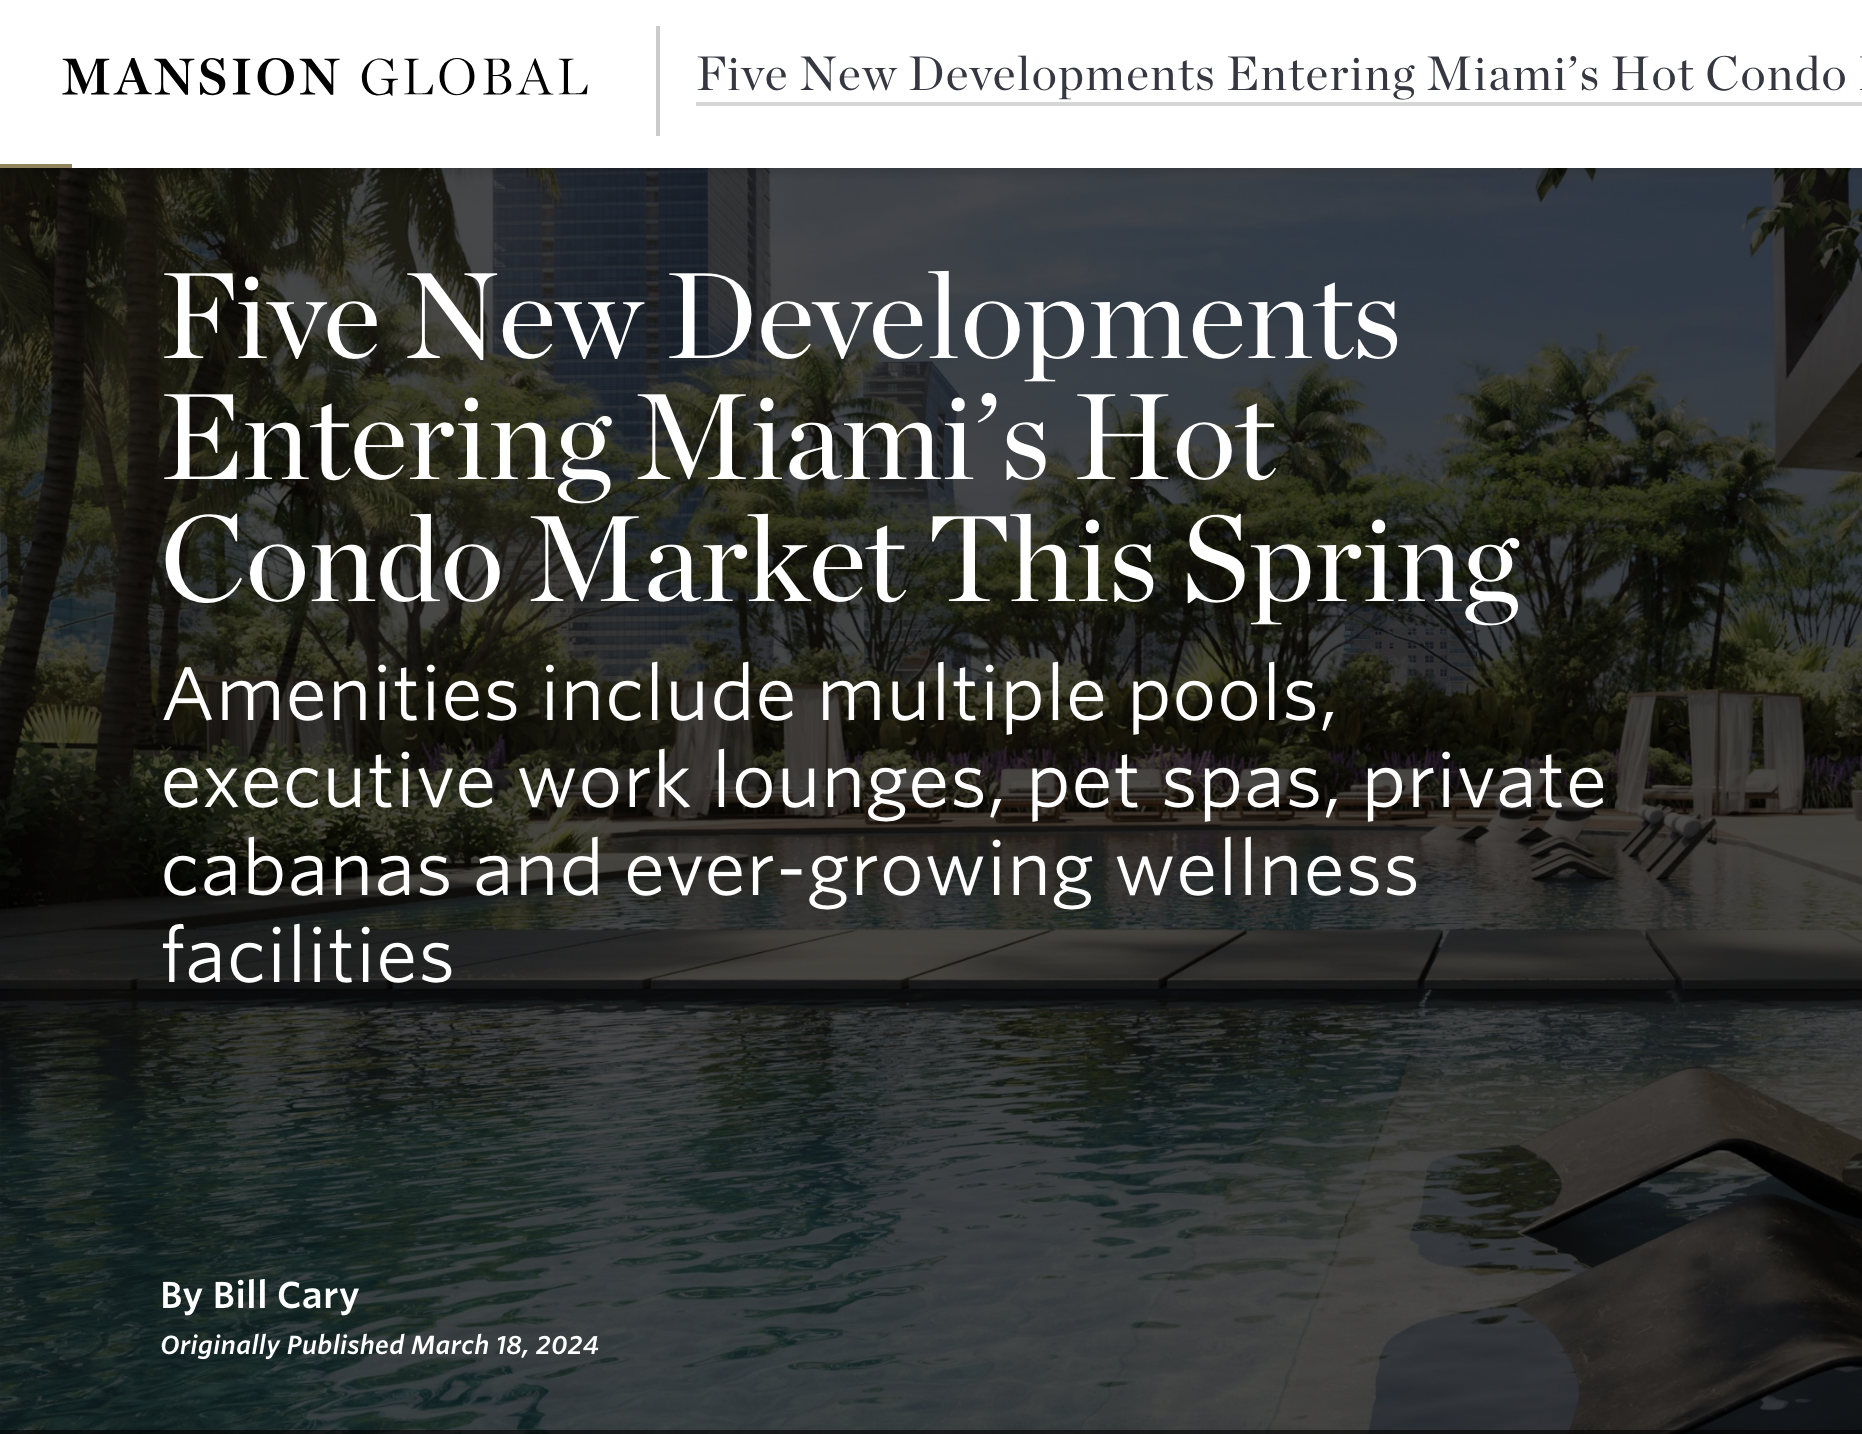 Mansion Global Asks Nancy about Miami’s Hottest New Developments